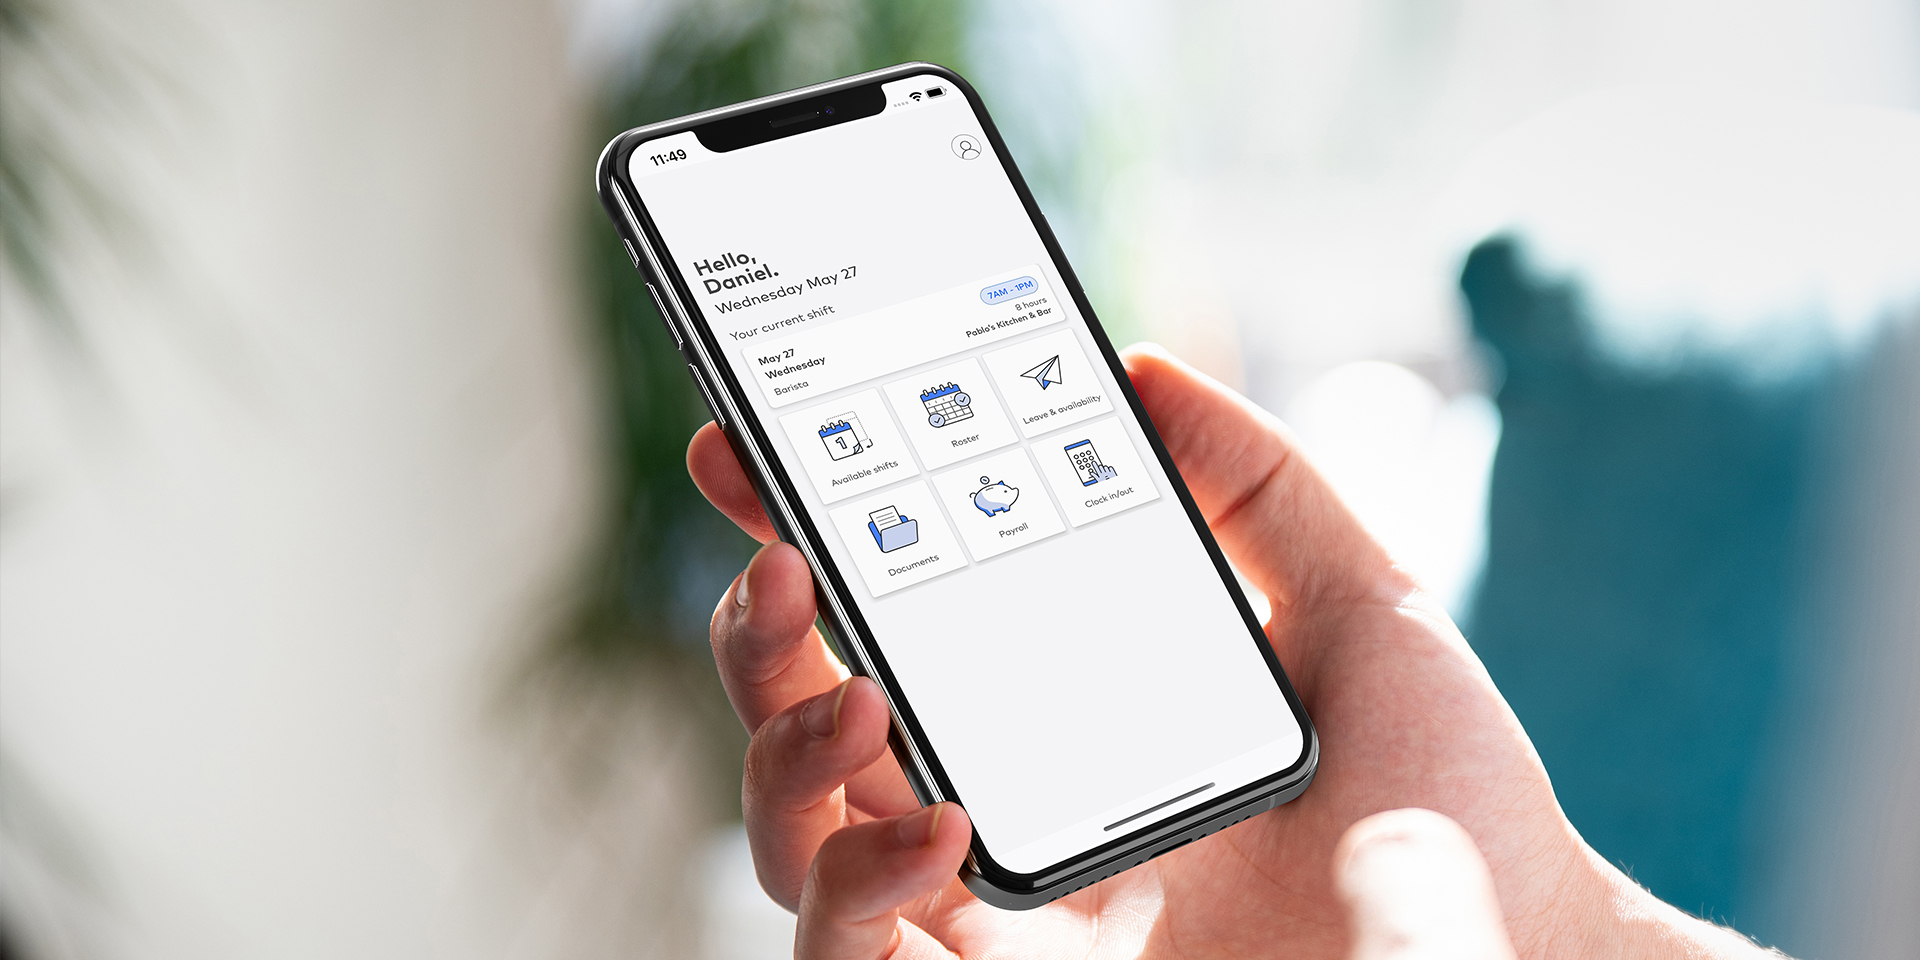 Roubler Software - Roubler's employee self service mobile app keeps your team connected 24/7 and enables them to check their schedule, request leave and more.